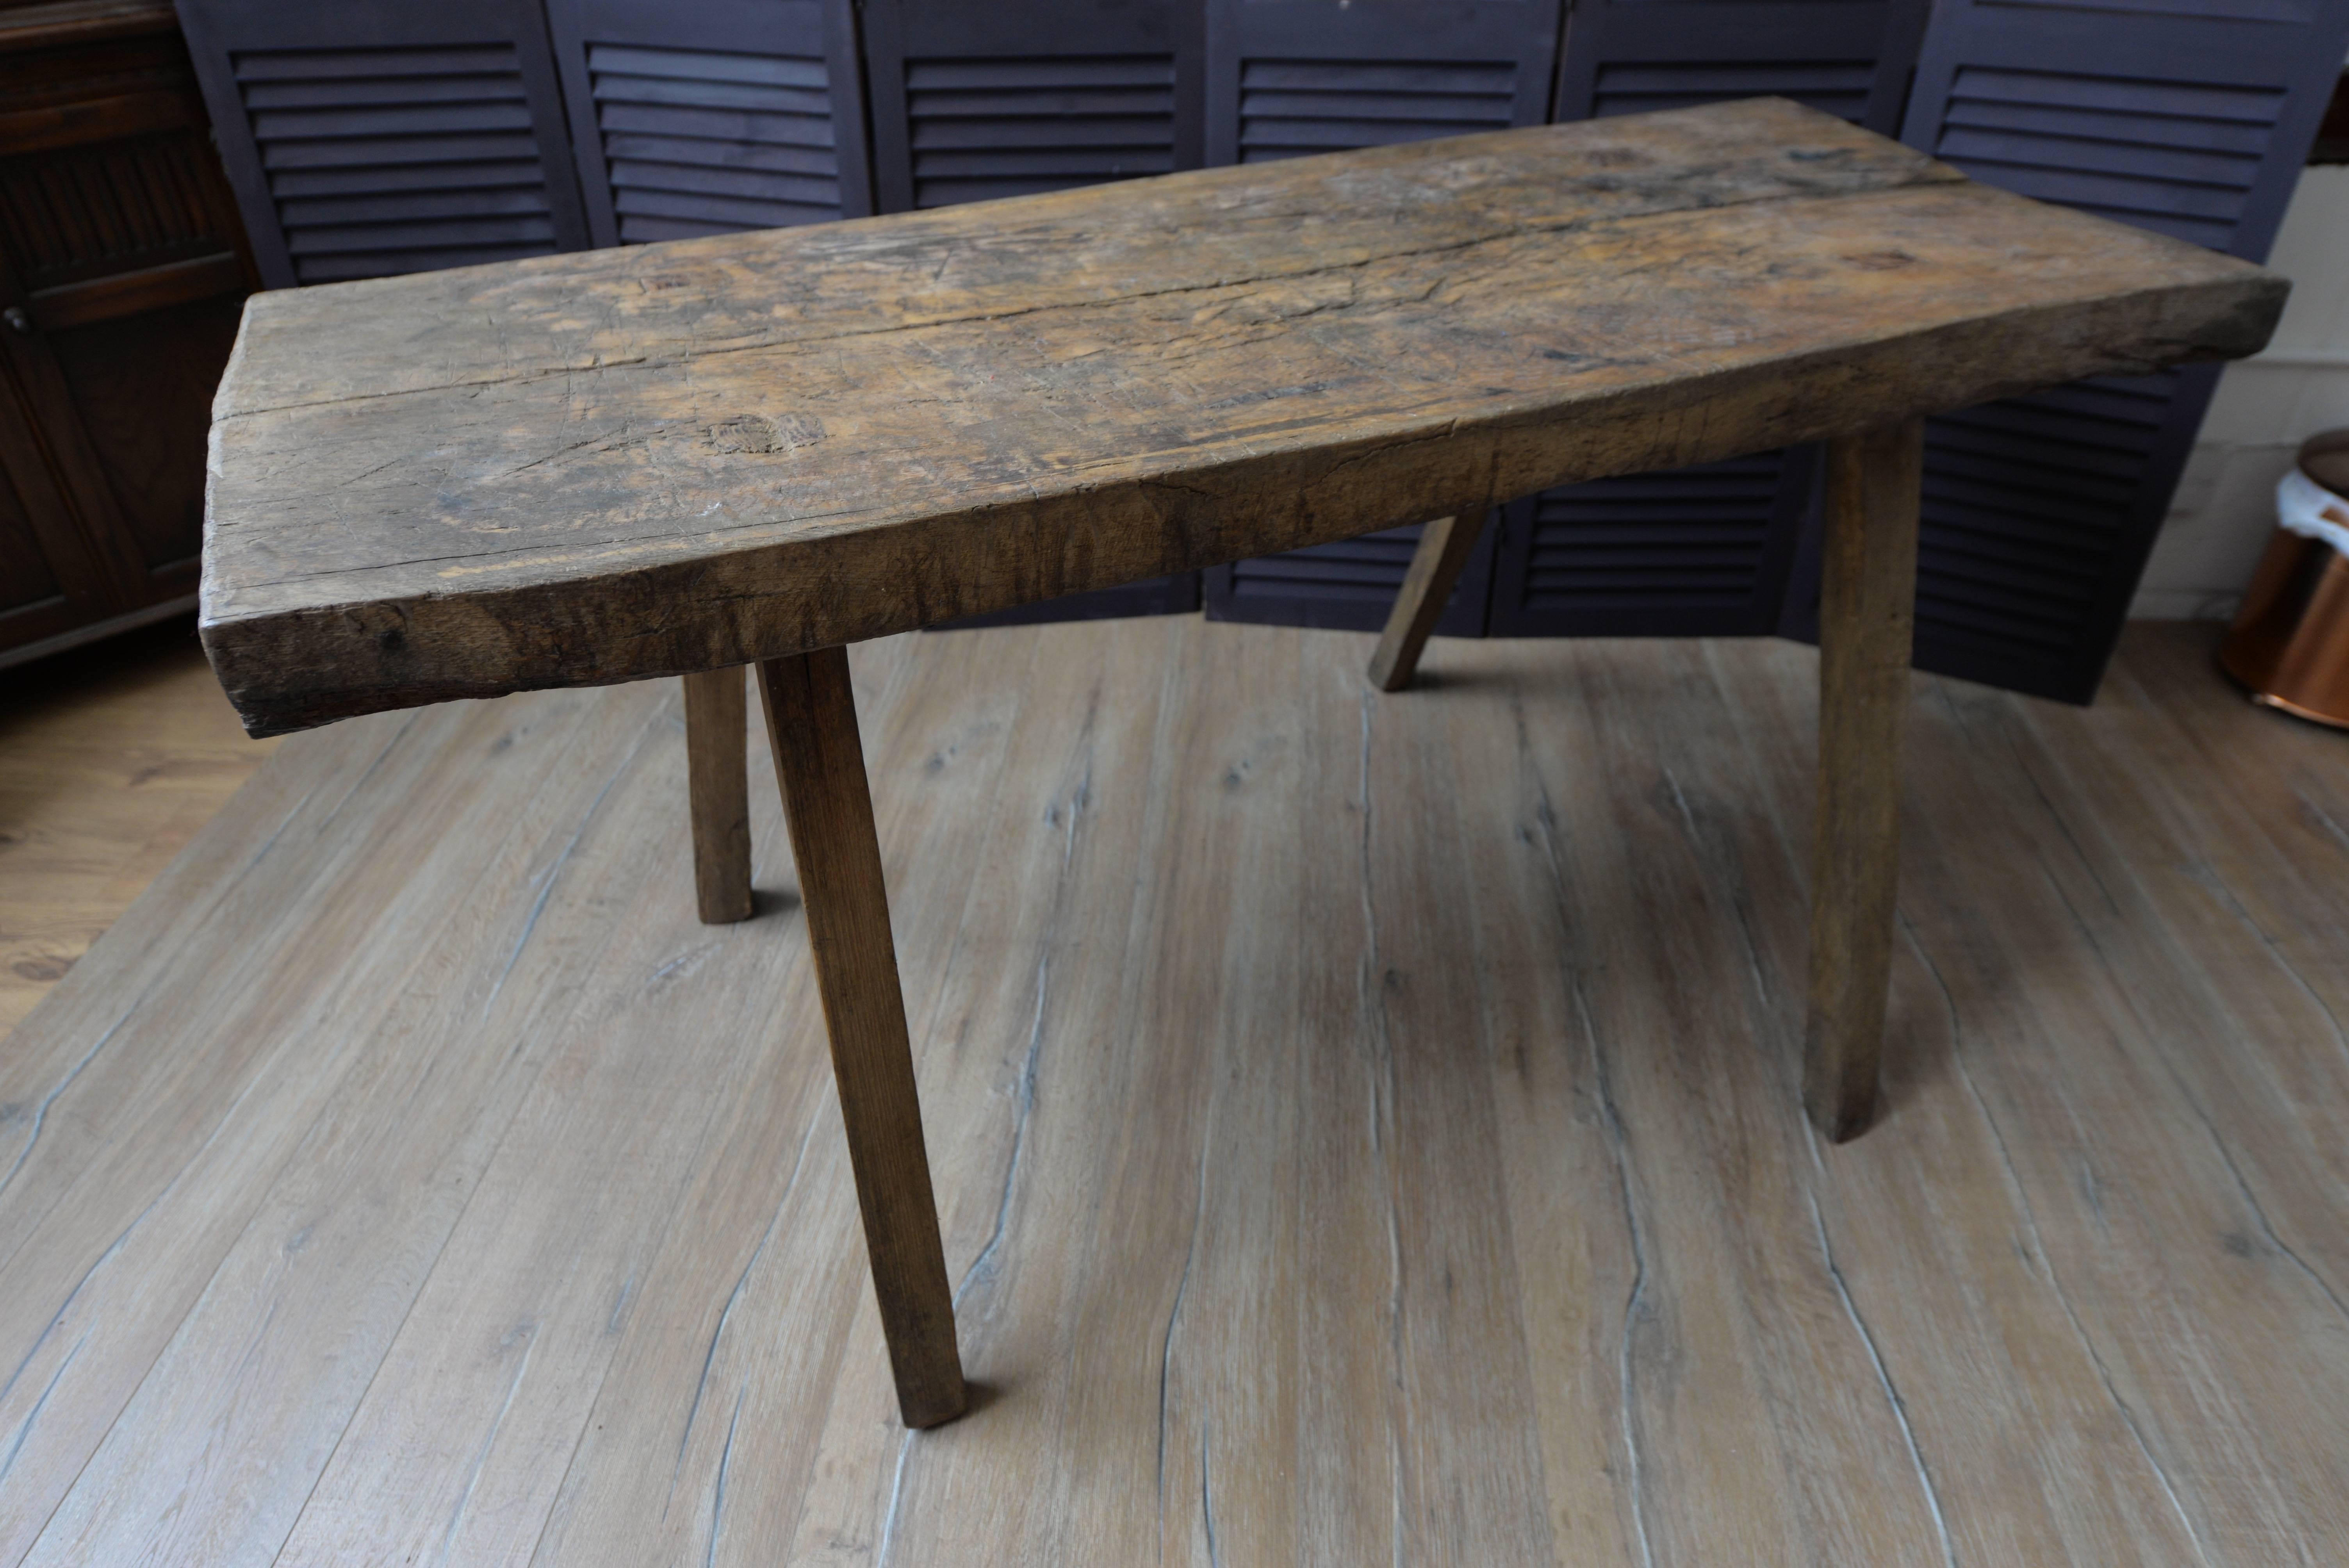 If shipped to the US or EU, no import tax applies.  

This table construction was used by butchers in France throughout the 19th century. Cuts and dents at the top of the wood have been originally marked by the working butcher and one can almost